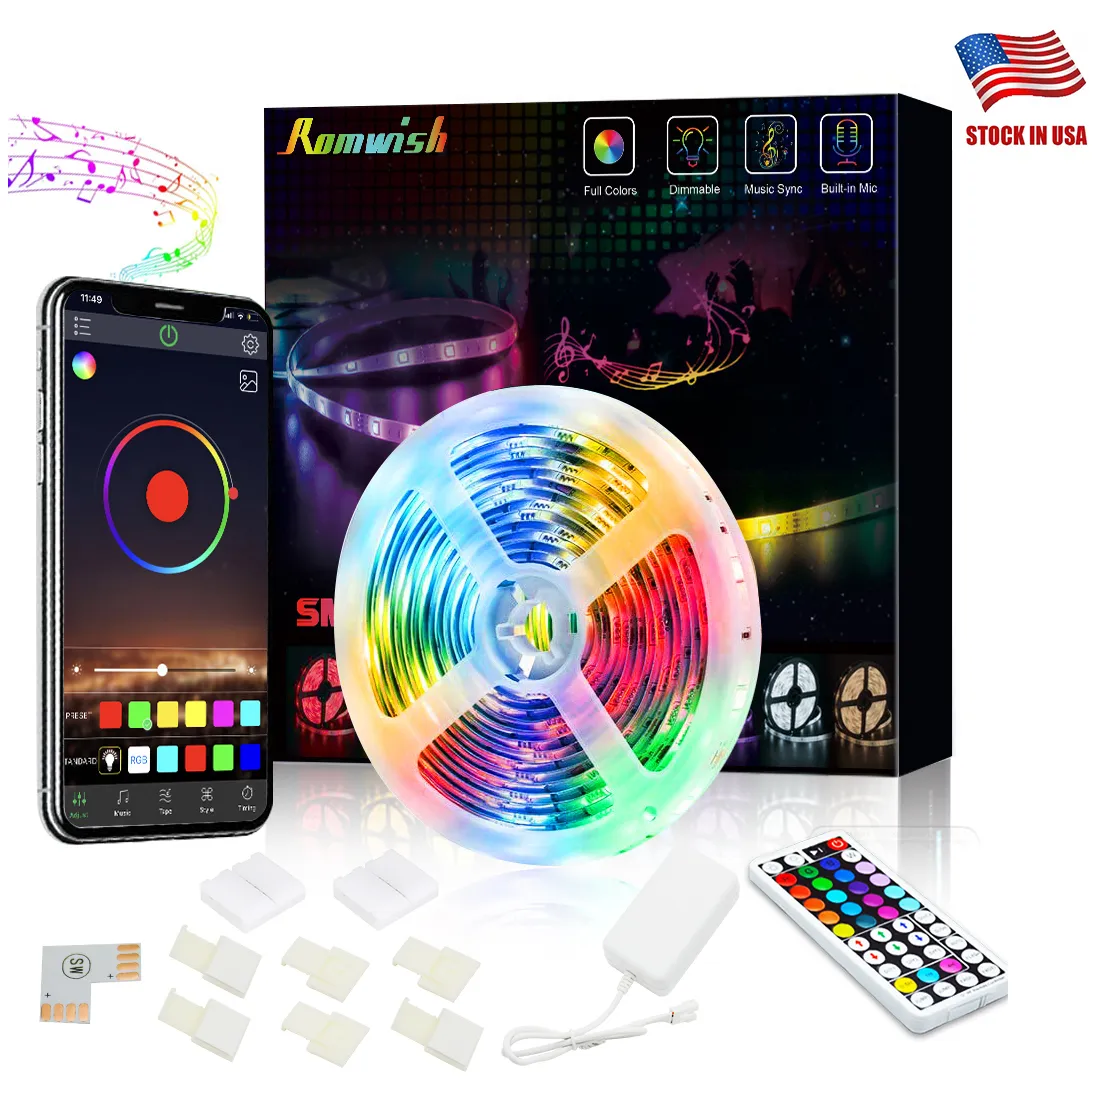 Retail Box SMD 5050 LED Strips RGB Lights Kit Waterdichte IP65 300 LED's Bluetooth-app 44 sleutels Afstandsbediening 12V 5A-voeding